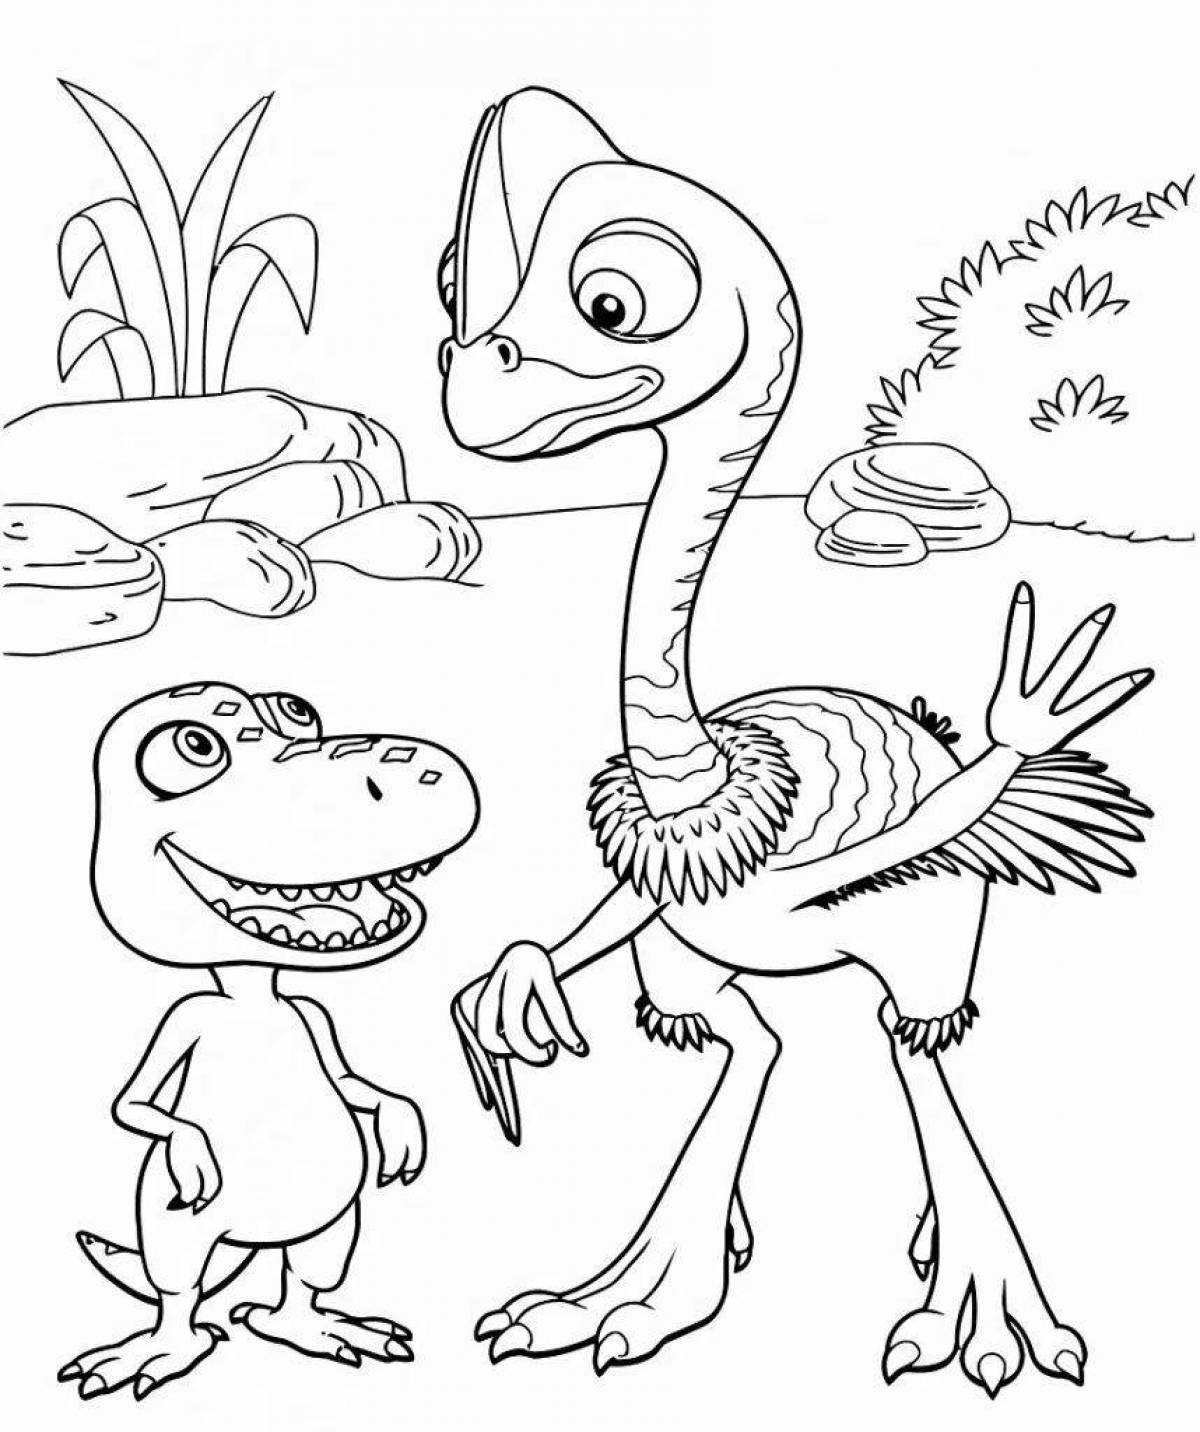 Mysterious turbosaur coloring page